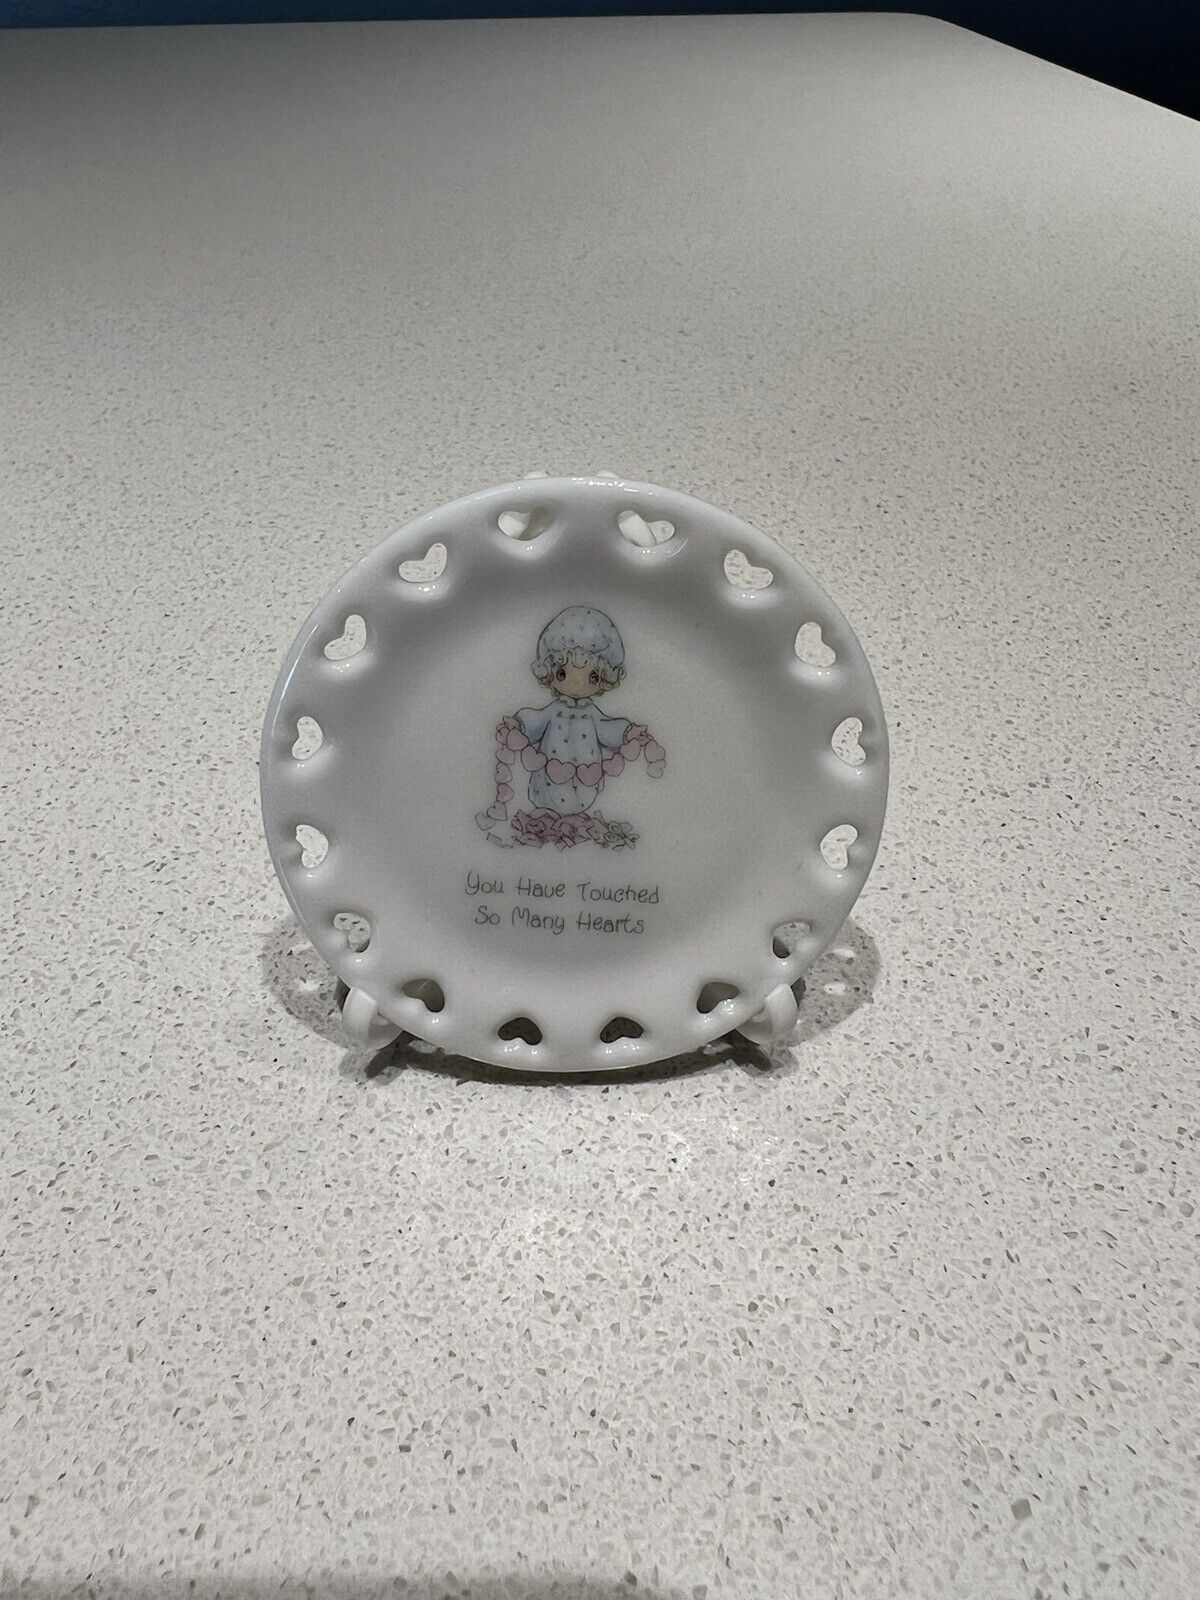 Rare 1990 Precious Moments Miniature plate “you have touched so many hearts"